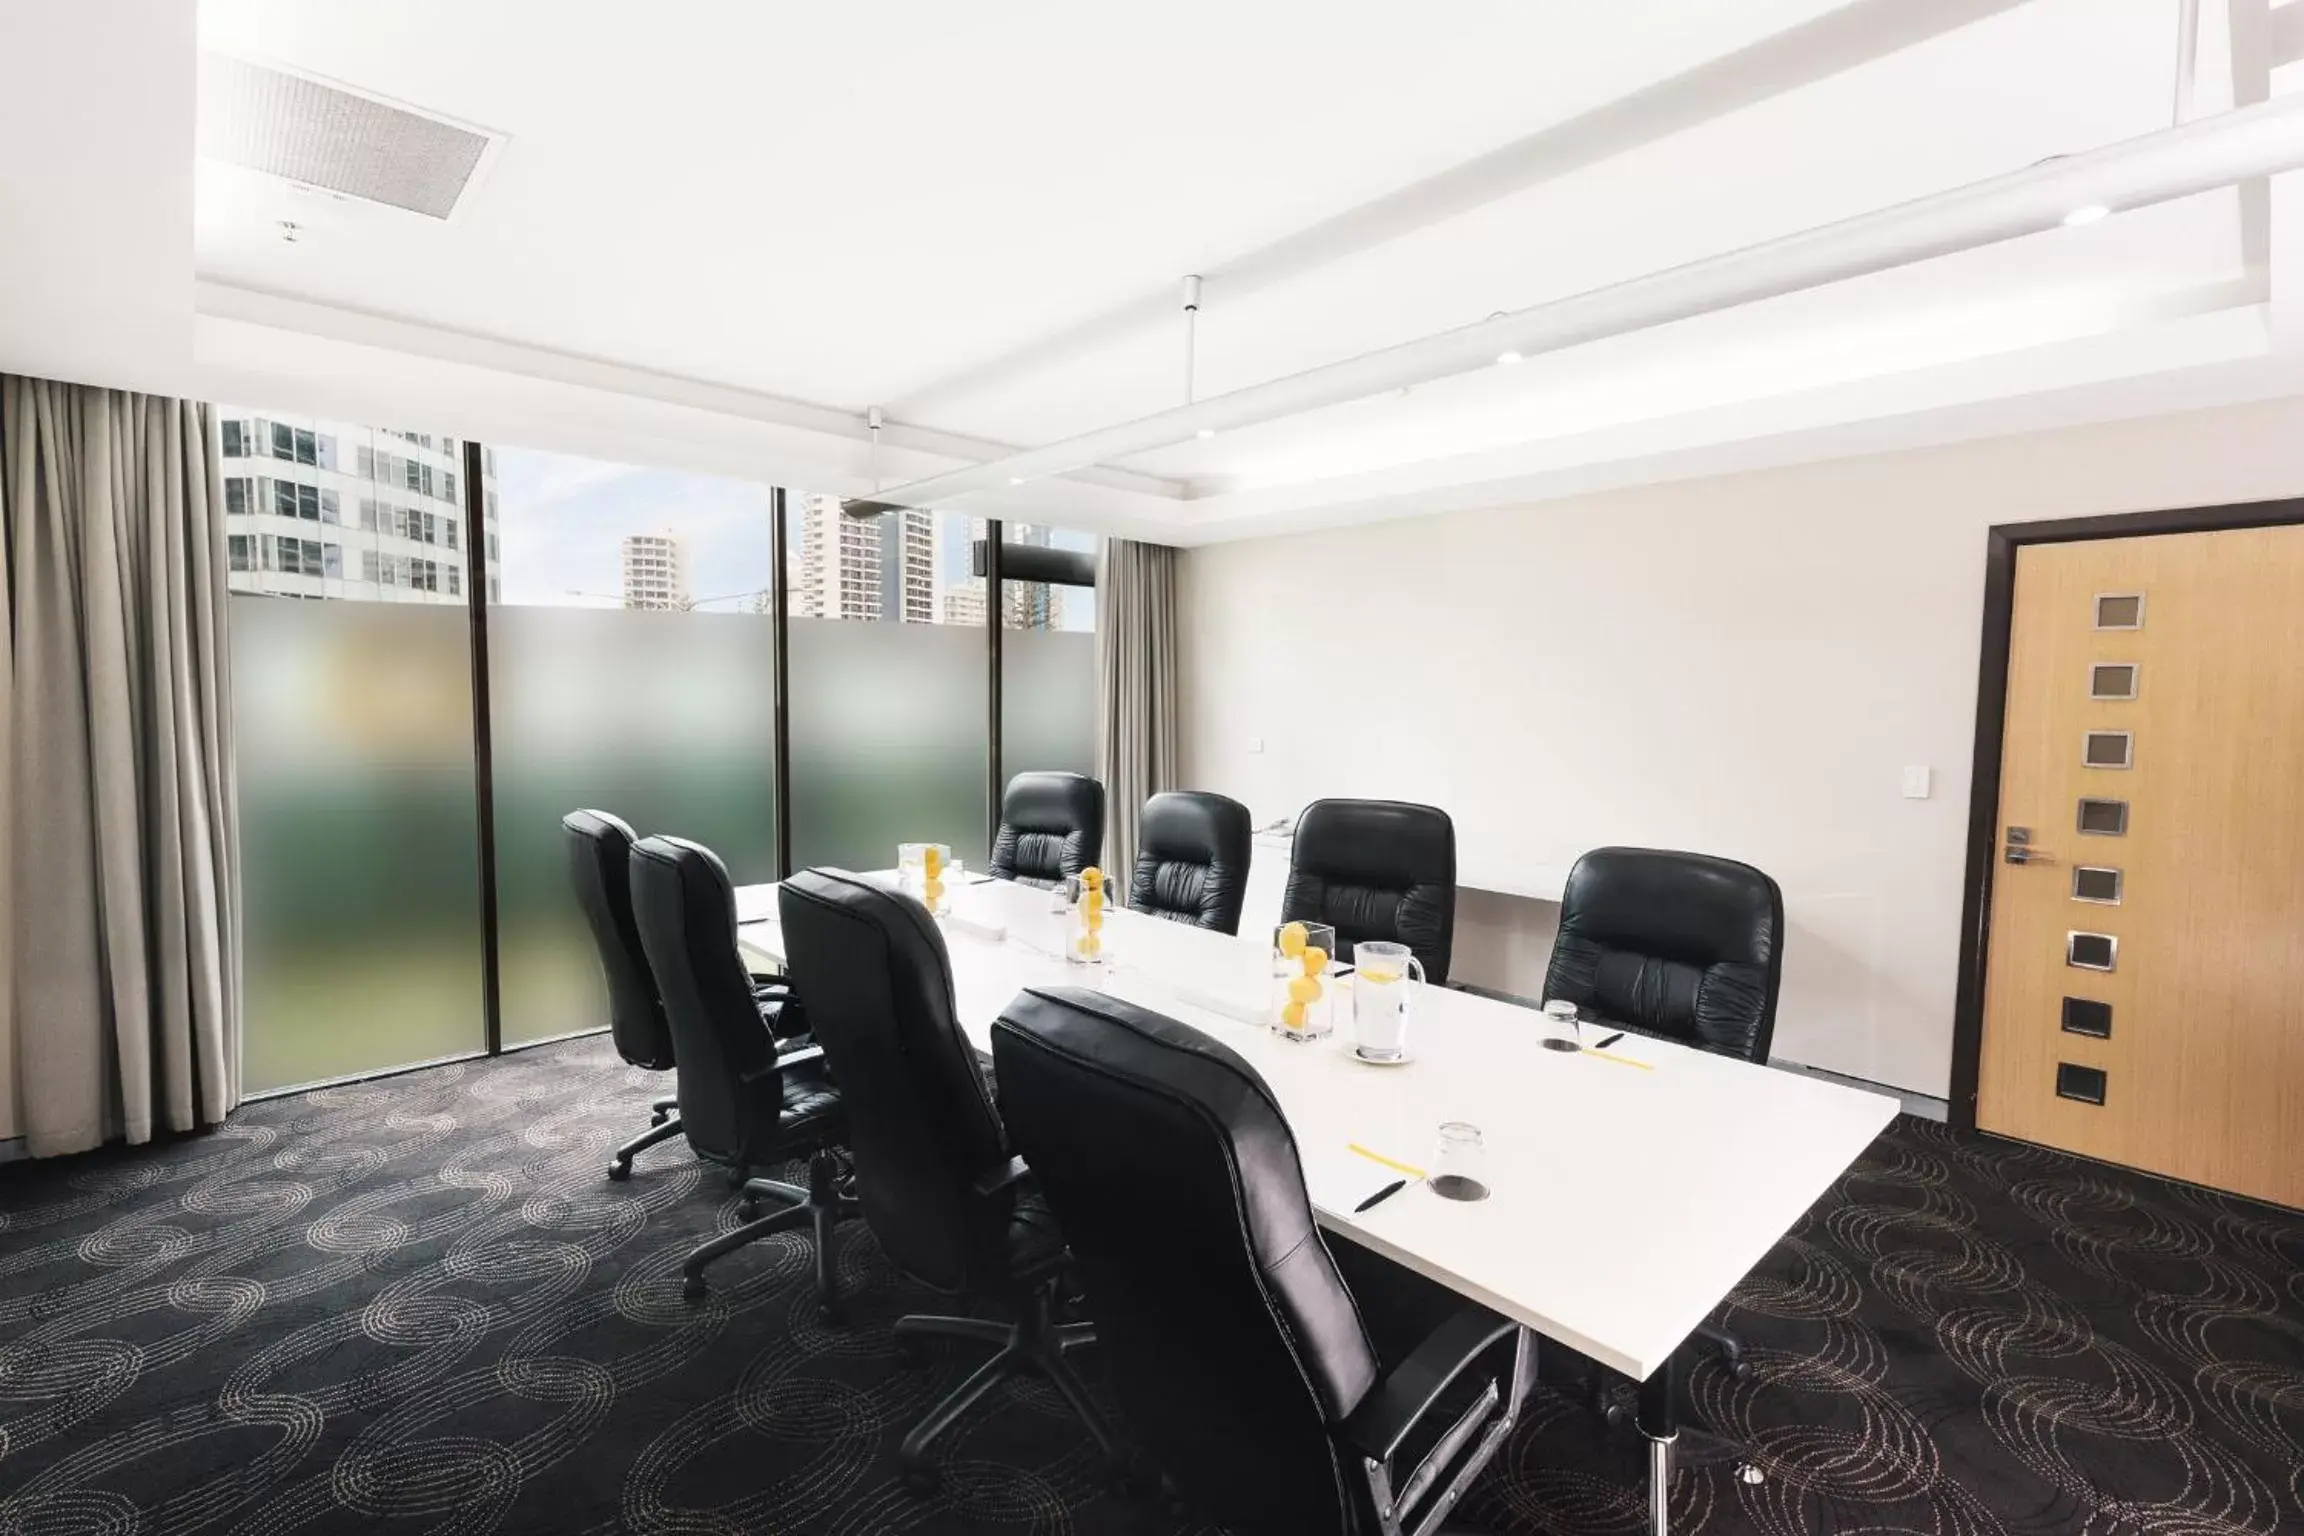 Meeting/conference room in voco Gold Coast, an IHG Hotel